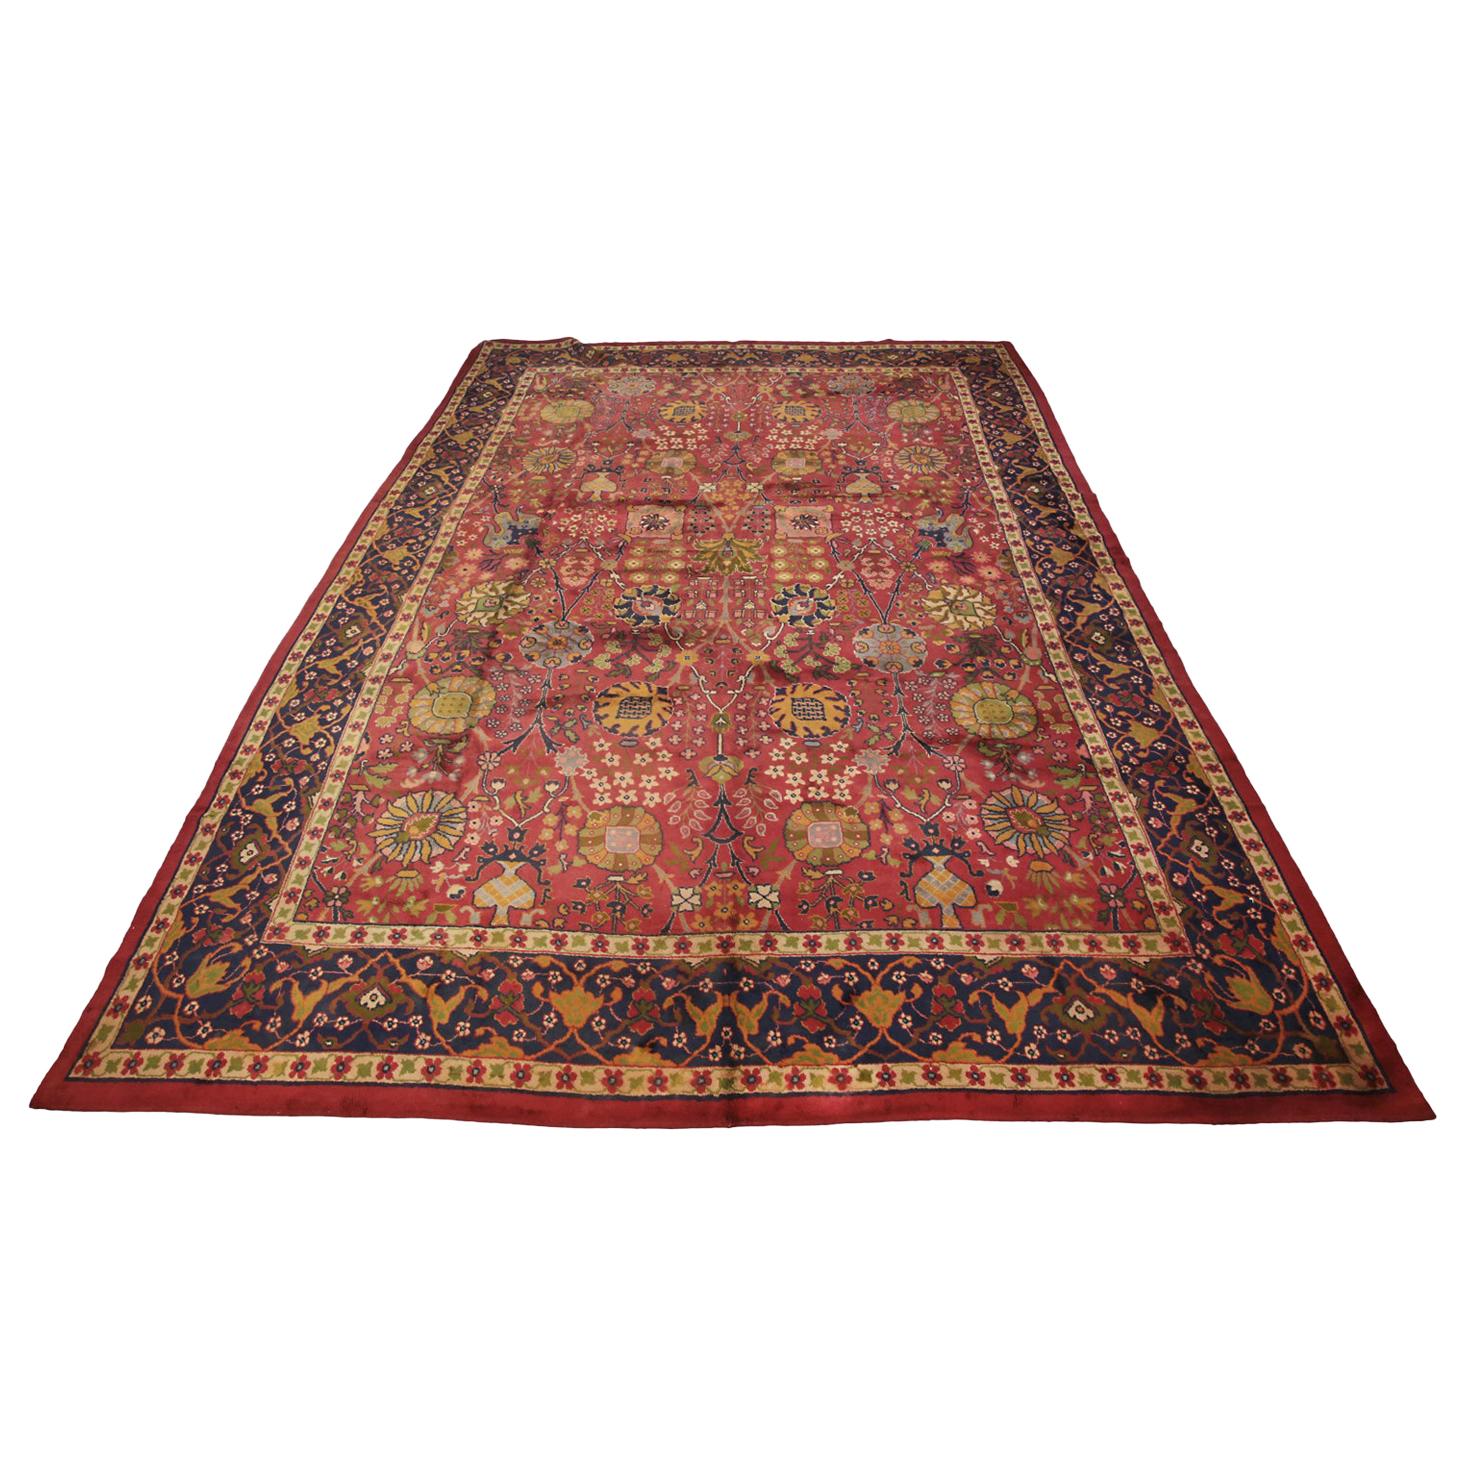 Circa 1920 Oversized Antique English Wool Donegal Carpet, Red Field For Sale